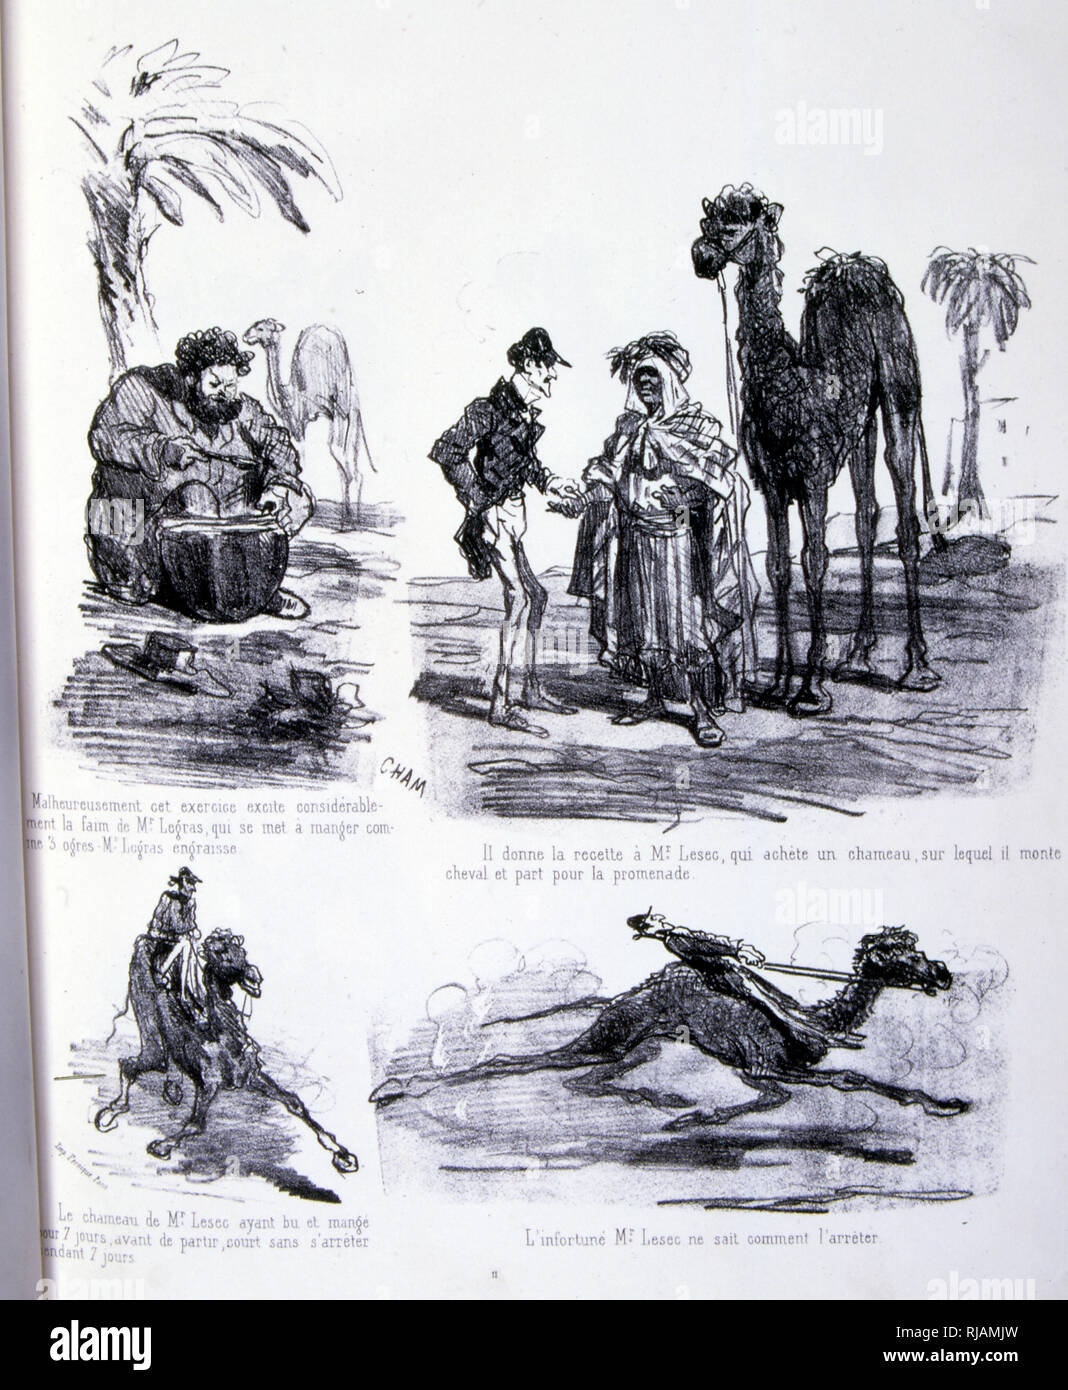 Series of lithograph illustrations of daily life in 19th century France by Amedee-Charles-Henri de Noe, (1819-79, illustrator). from L'Art d'engraisser et de maigrir a Volonte (The Art of fattening and losing weight). 1860 Stock Photo